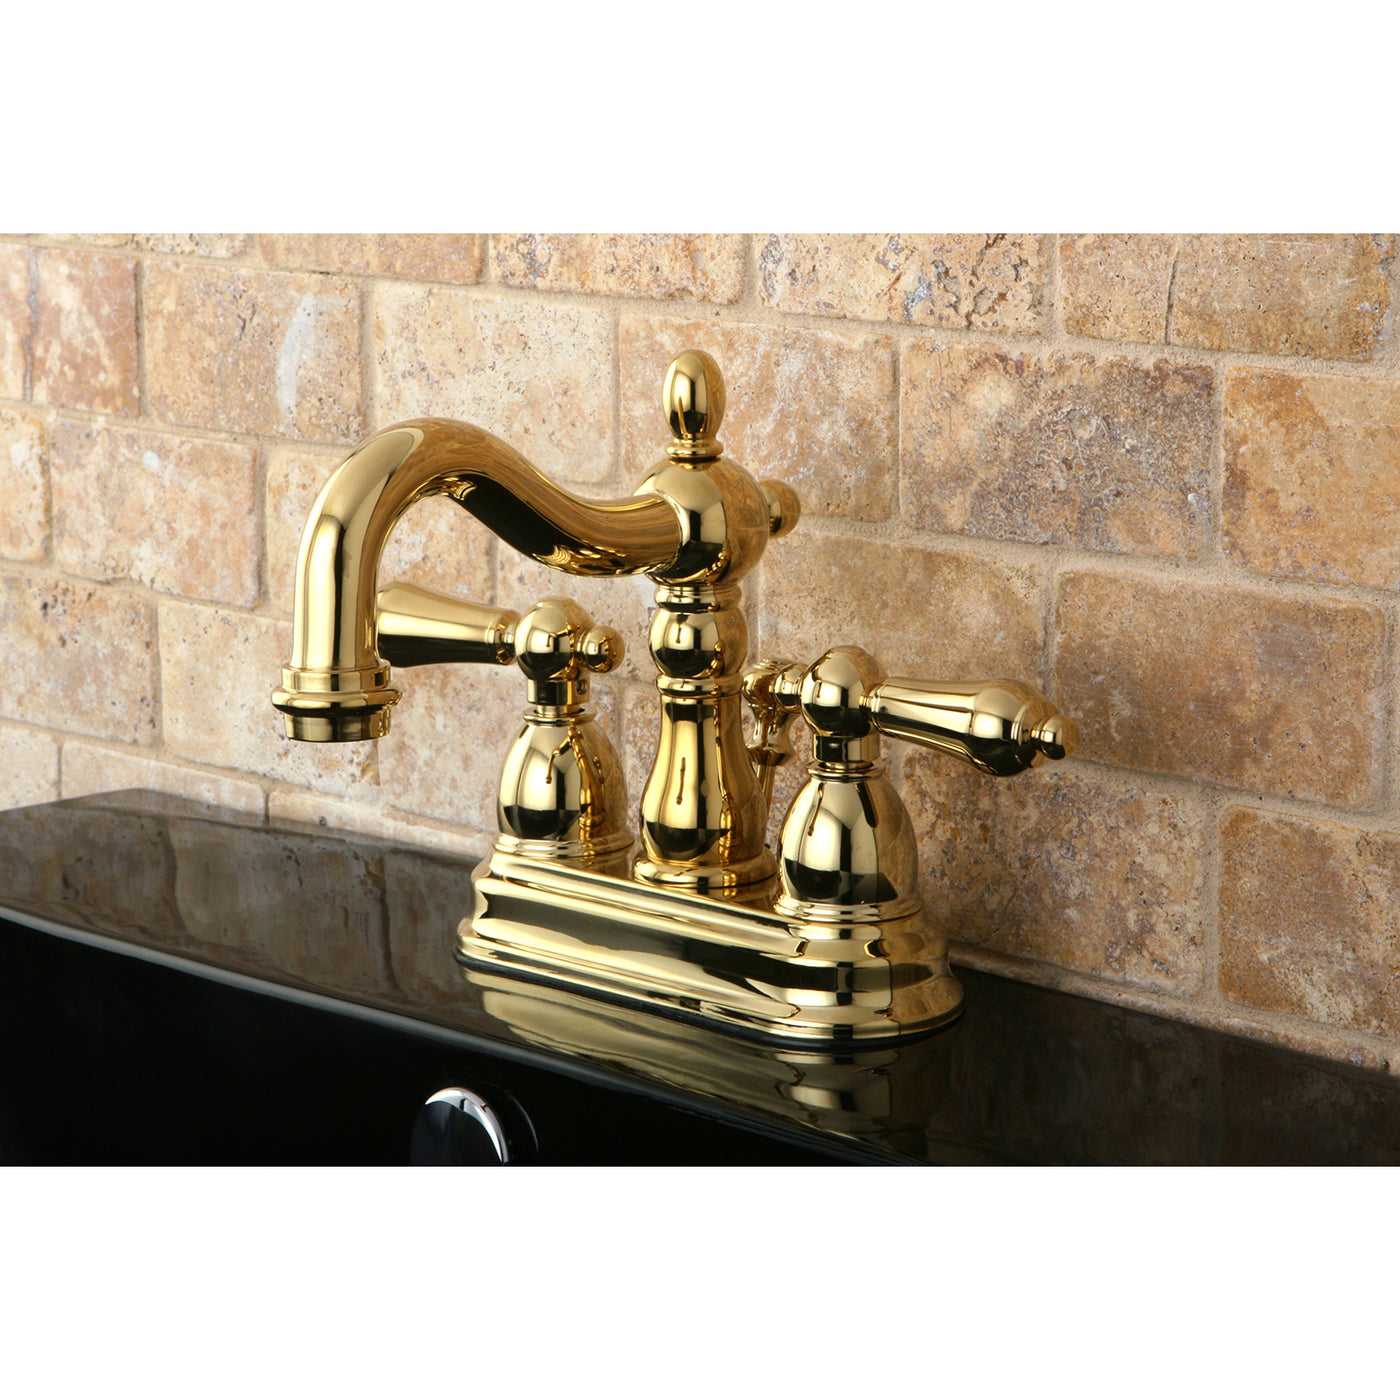 Elements of Design EB1602AL 4-Inch Centerset Bathroom Faucet with Plastic Pop-Up, Polished Brass